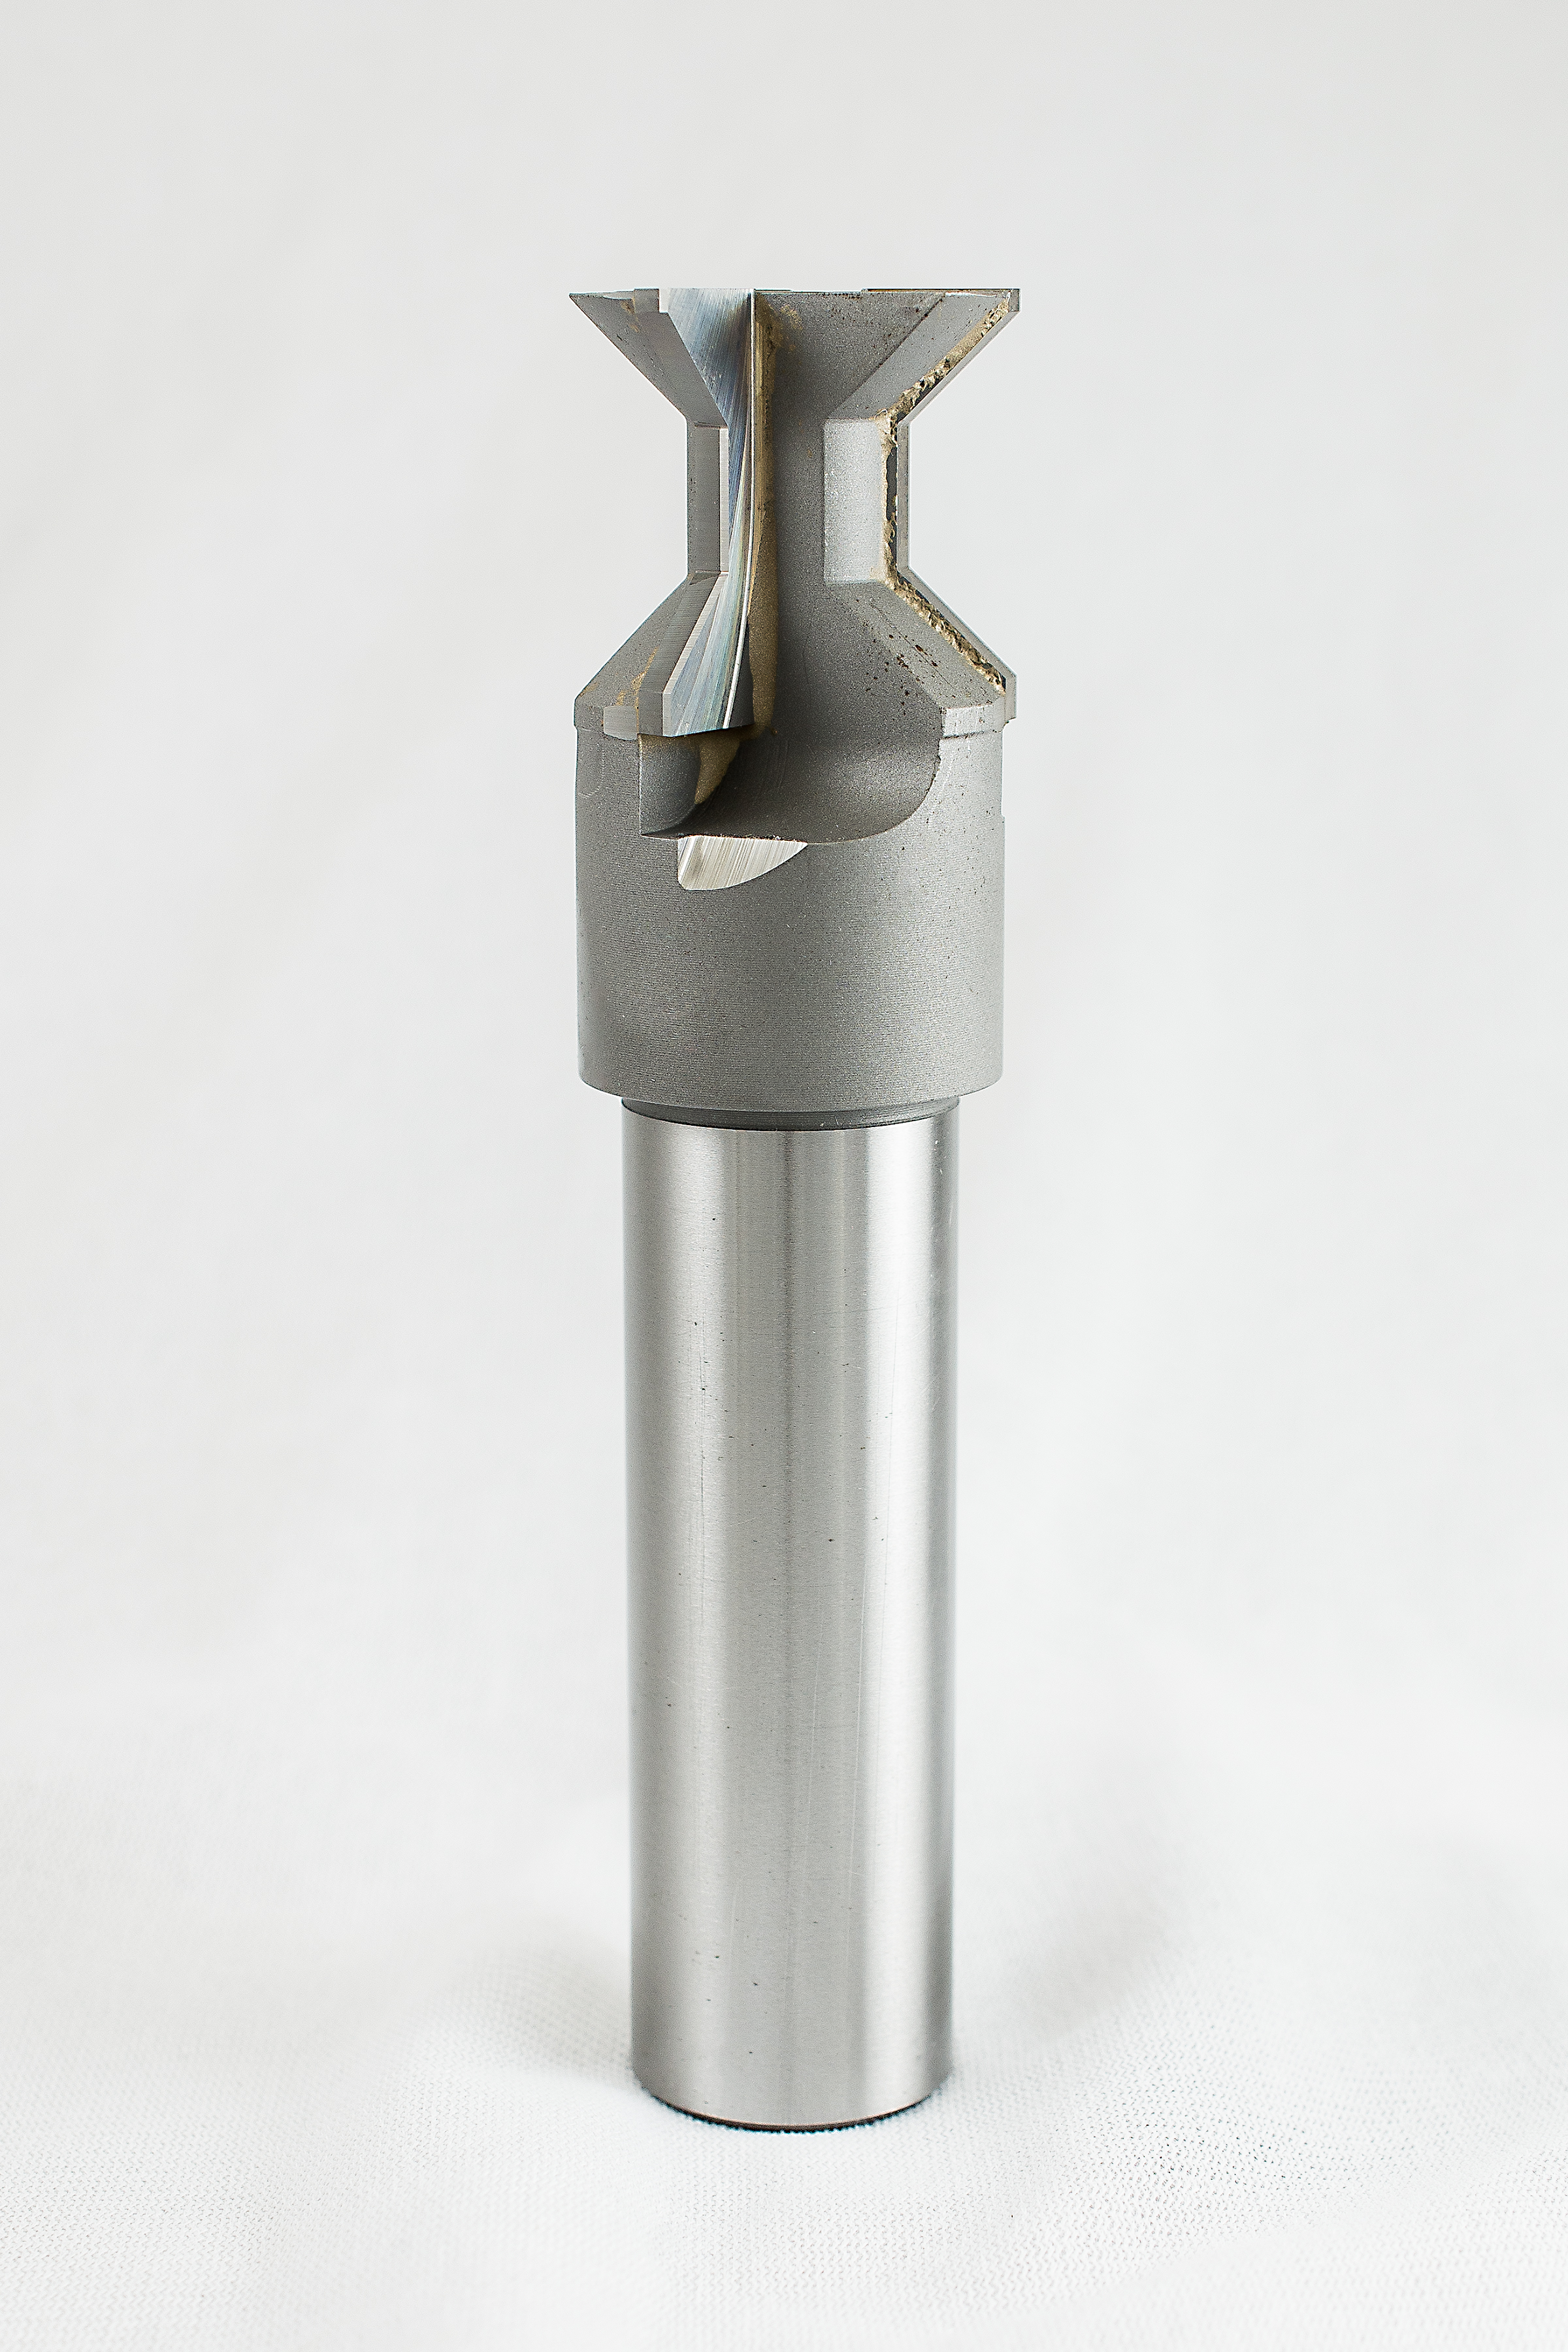 image of Carbide and HSS Form Milling Cutters